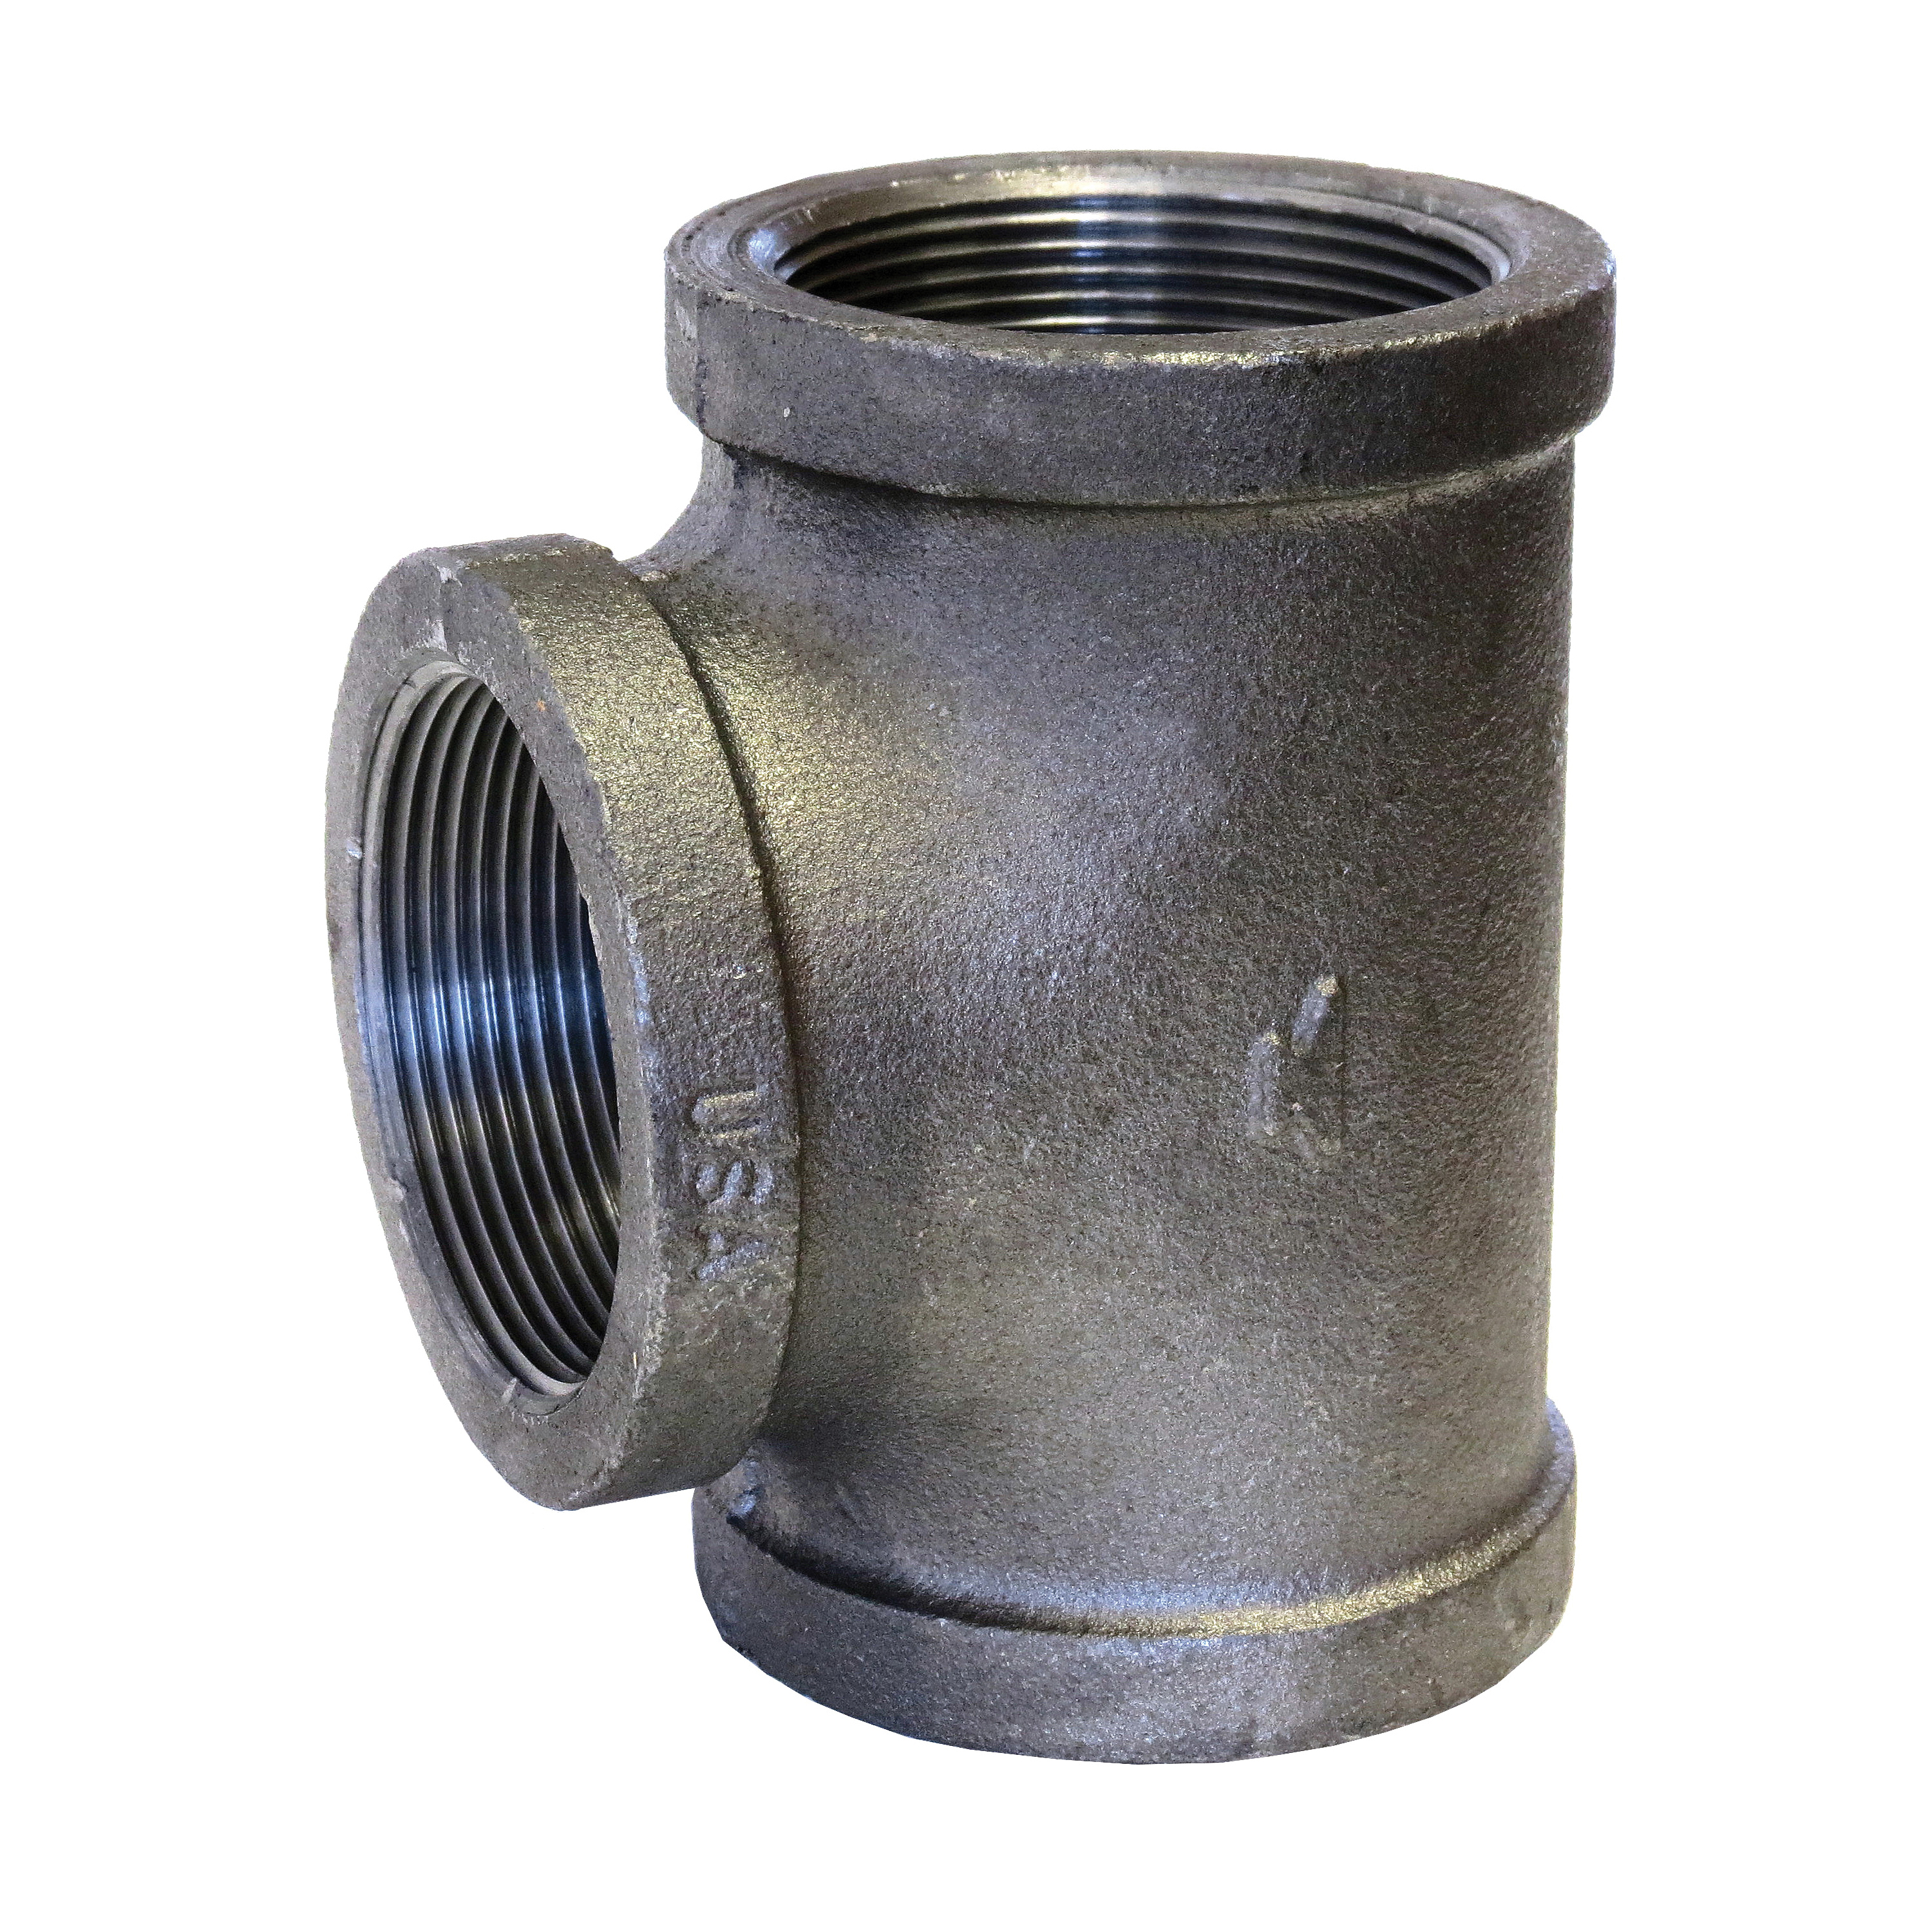 SPF/Anvil™ 0811030006 FIG 3105 Straight Pipe Tee, 3/4 in Nominal, FNPT End Style, 150 lb, Malleable Iron, Galvanized, Import